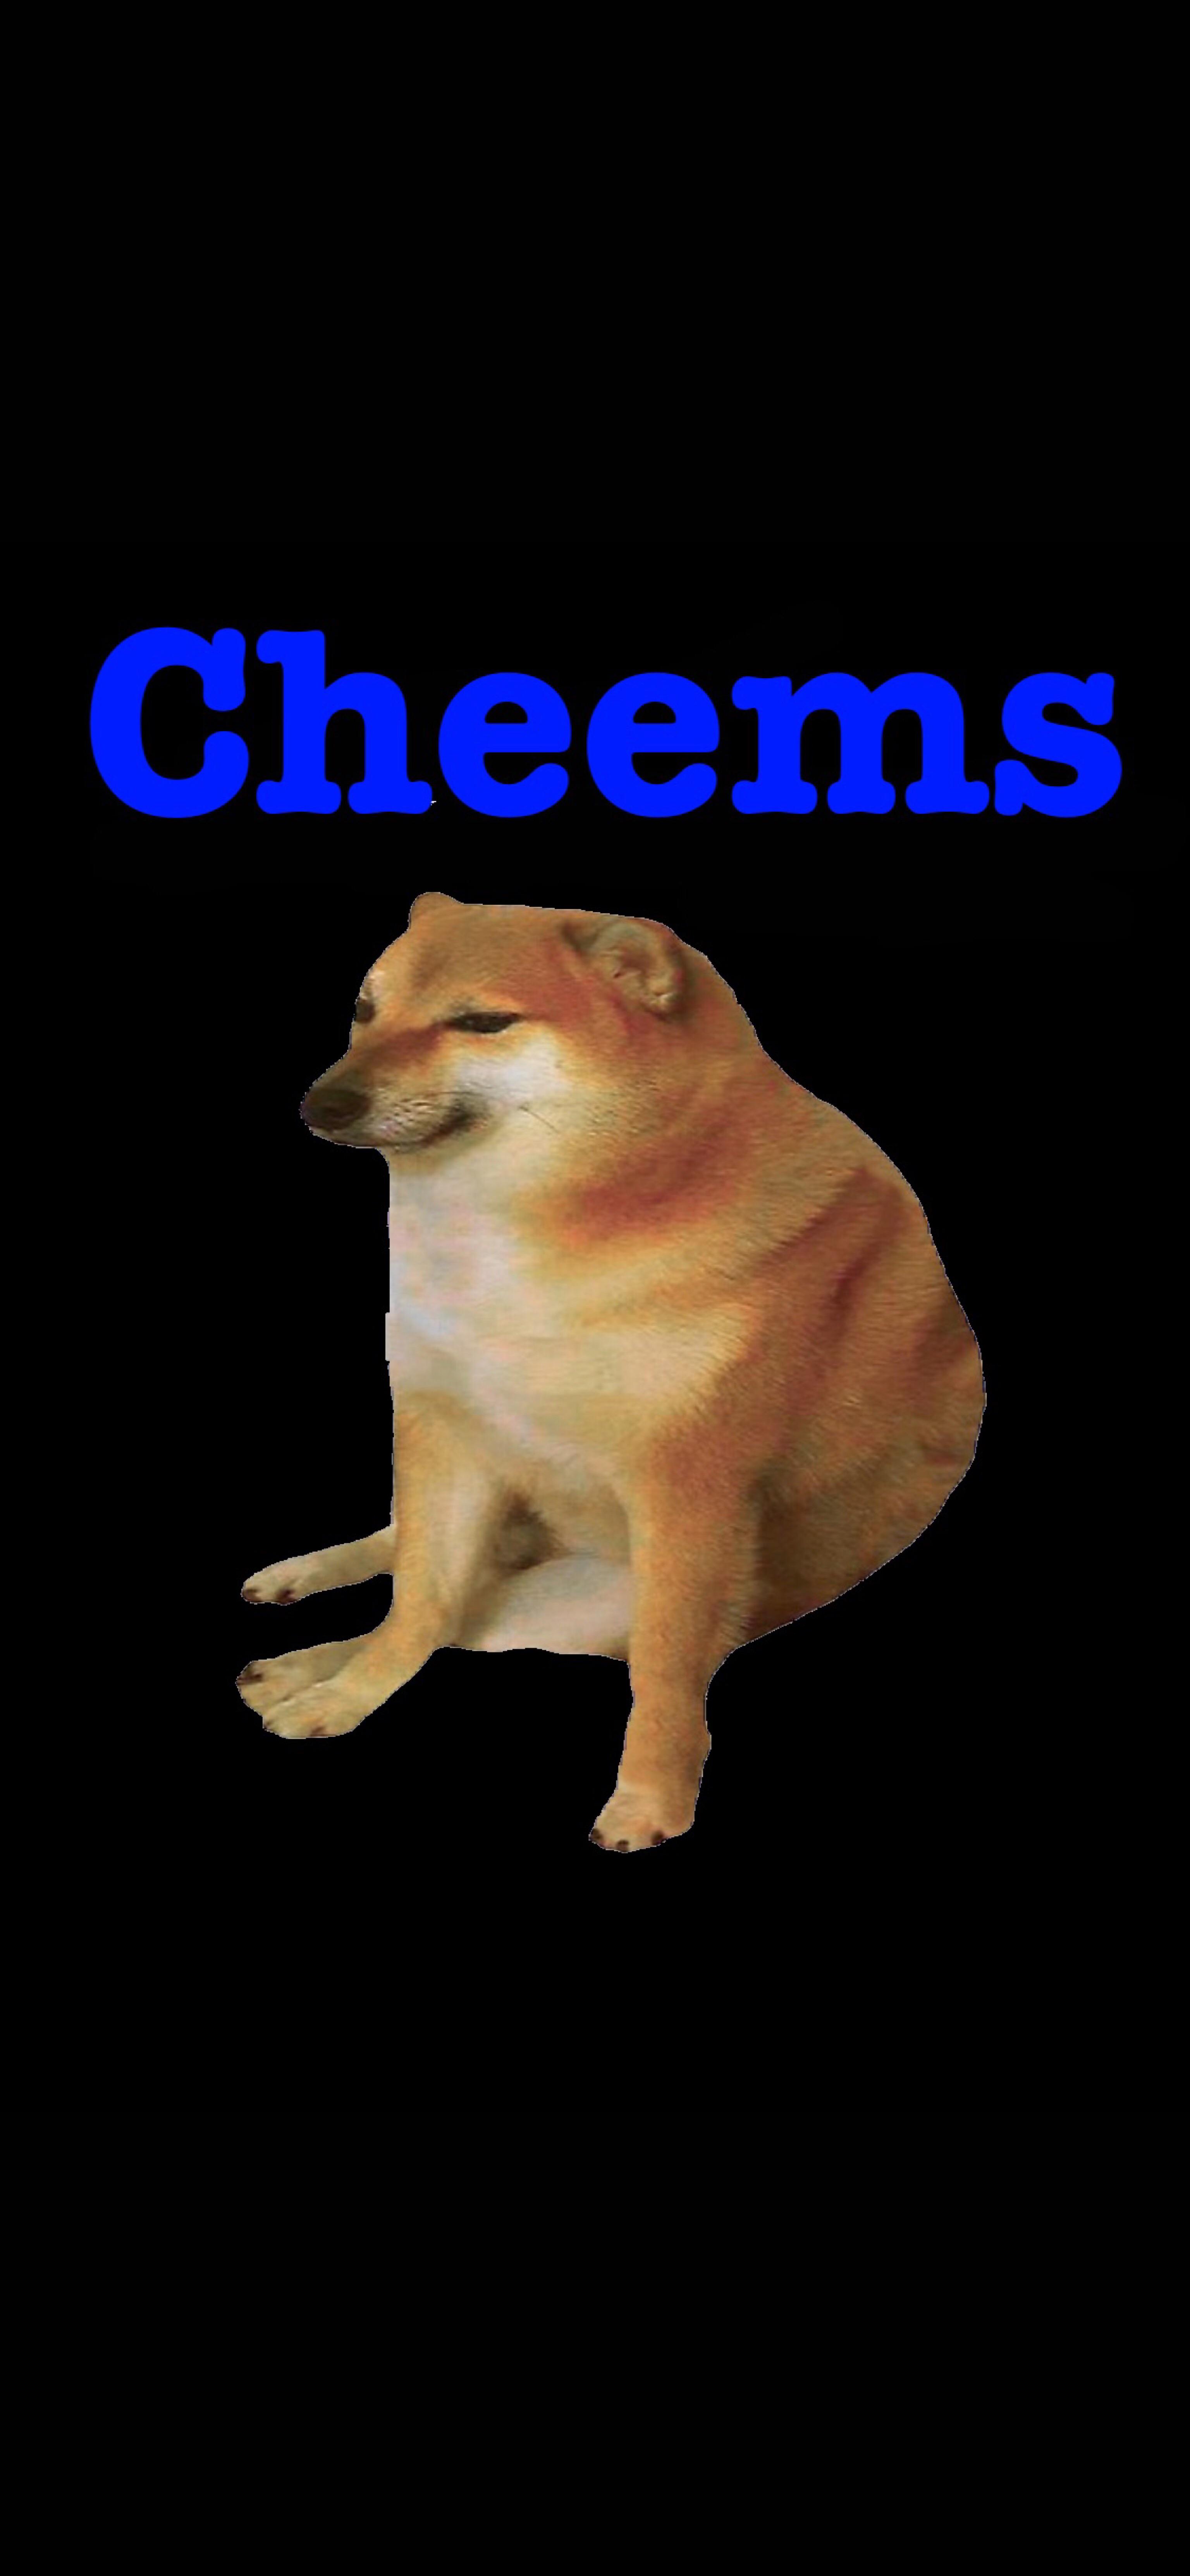 Cheems Wallpapers